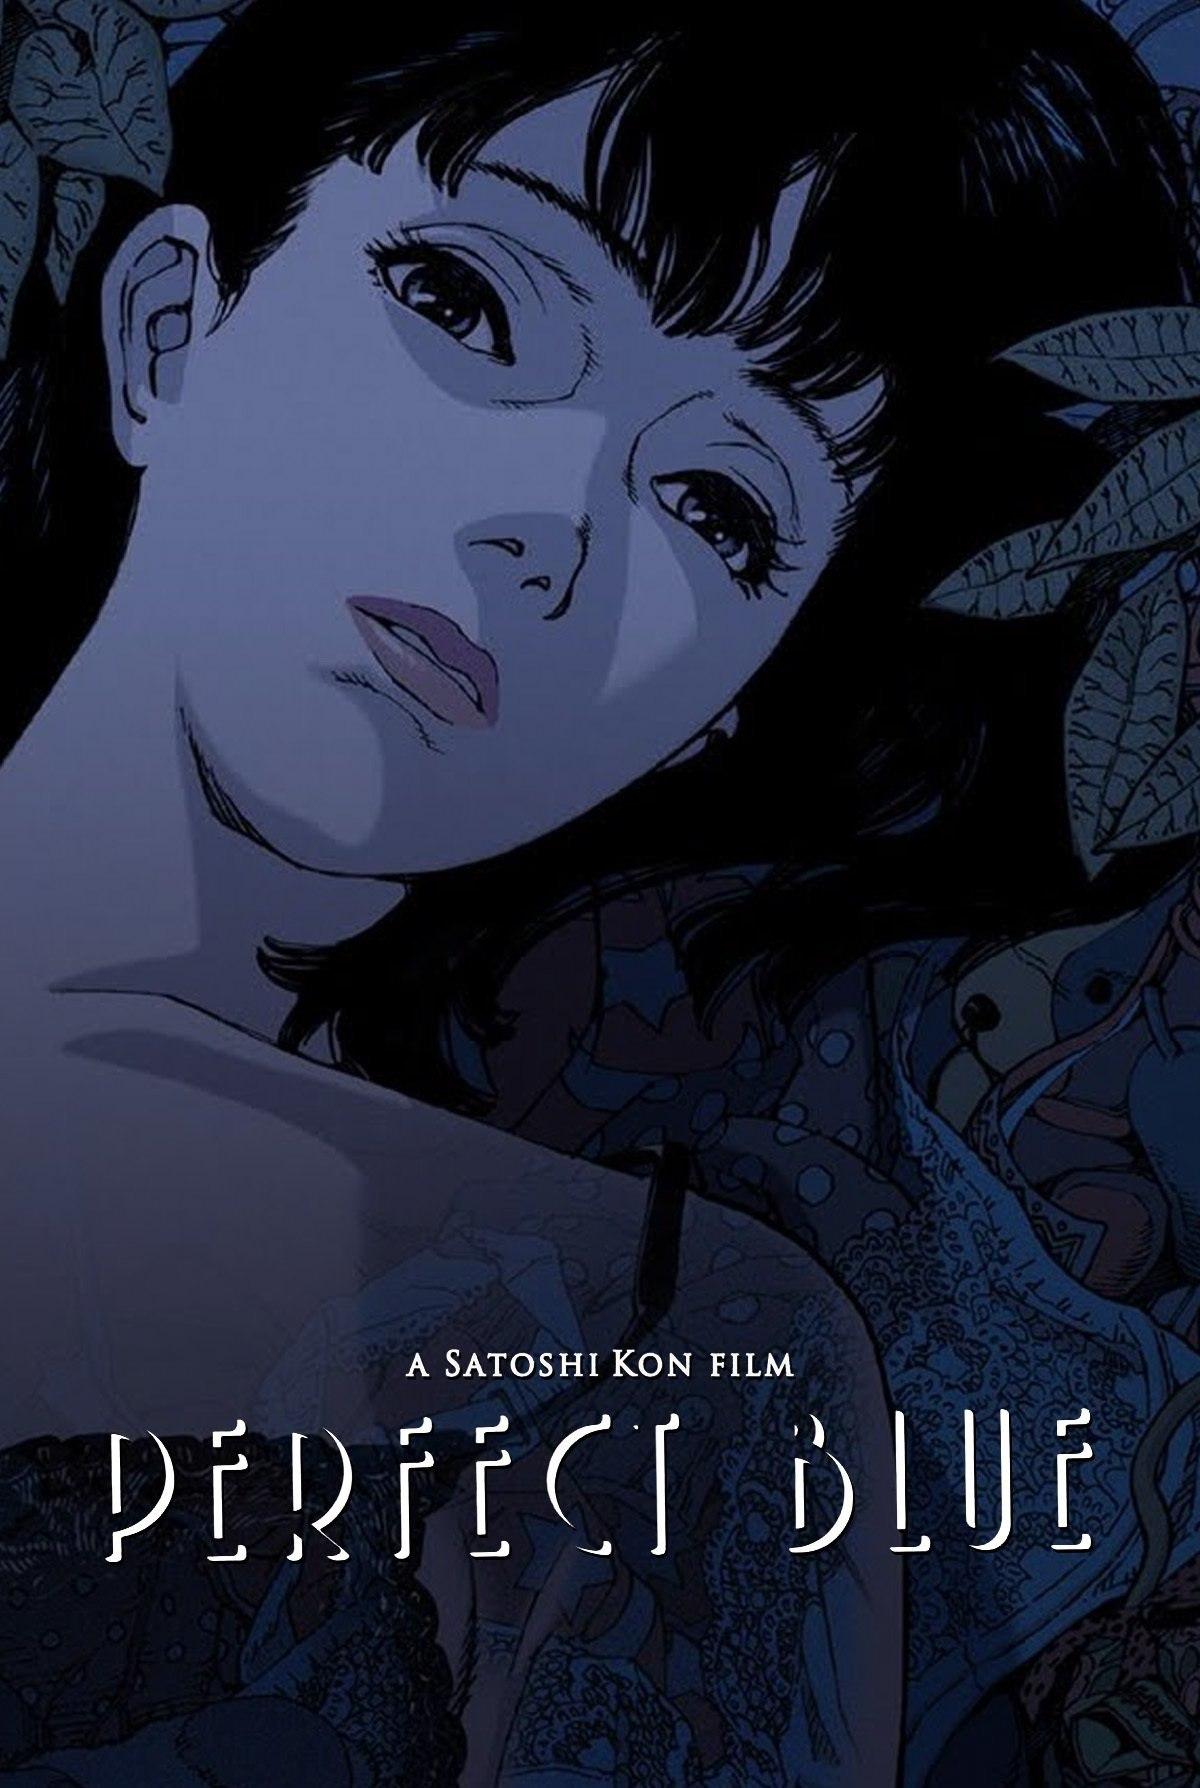 TRAILER: GKIDS Acquires Theatrical Rights to 'Perfect Blue